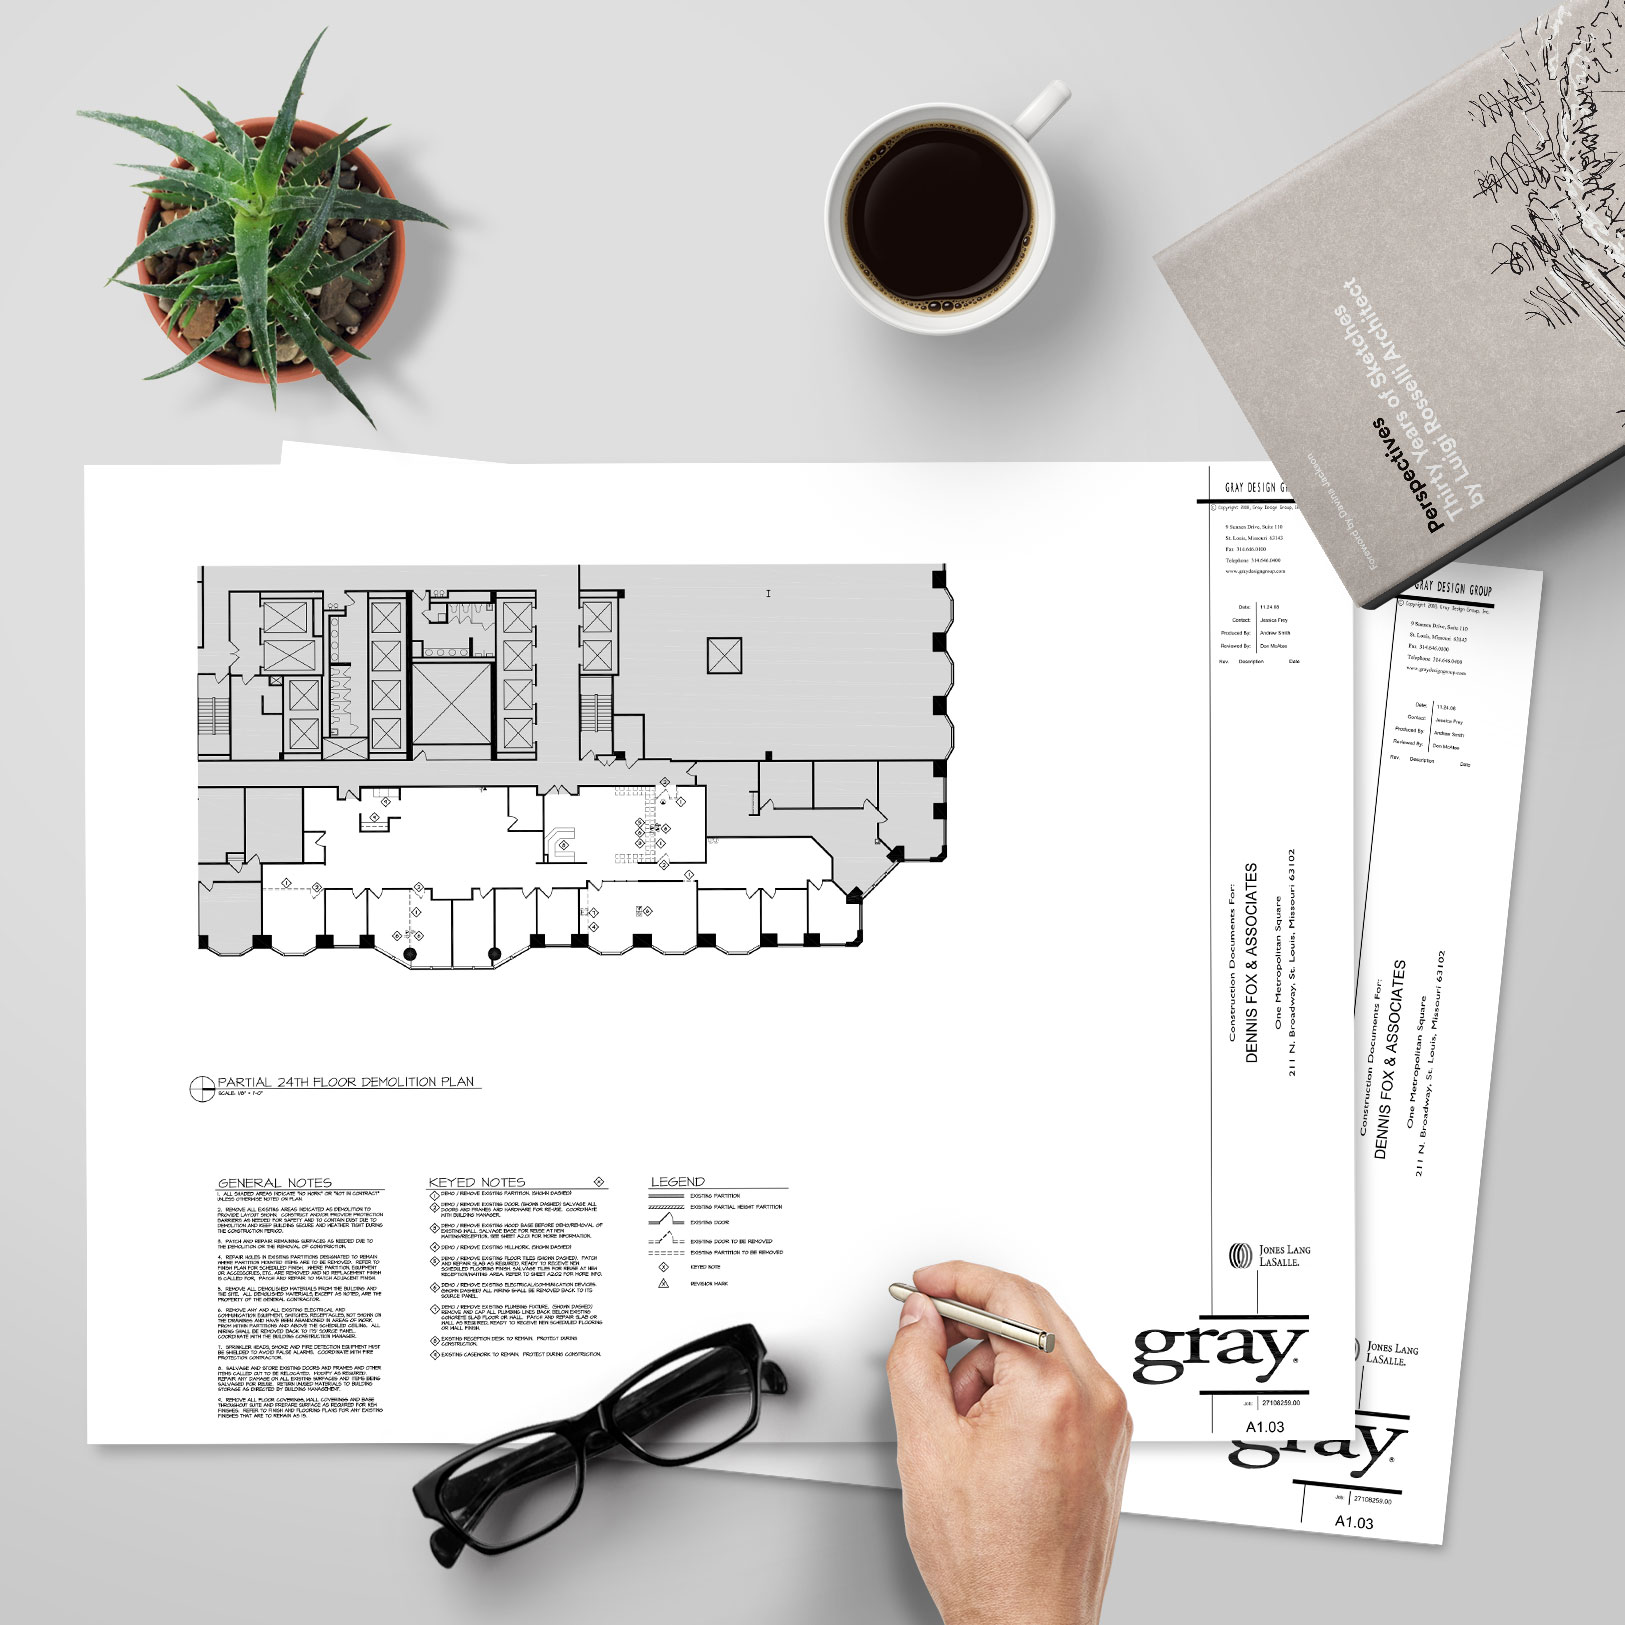 Image of the construction documents, spread out on a table, that I produced while working at Gray Design Group in St. Louis